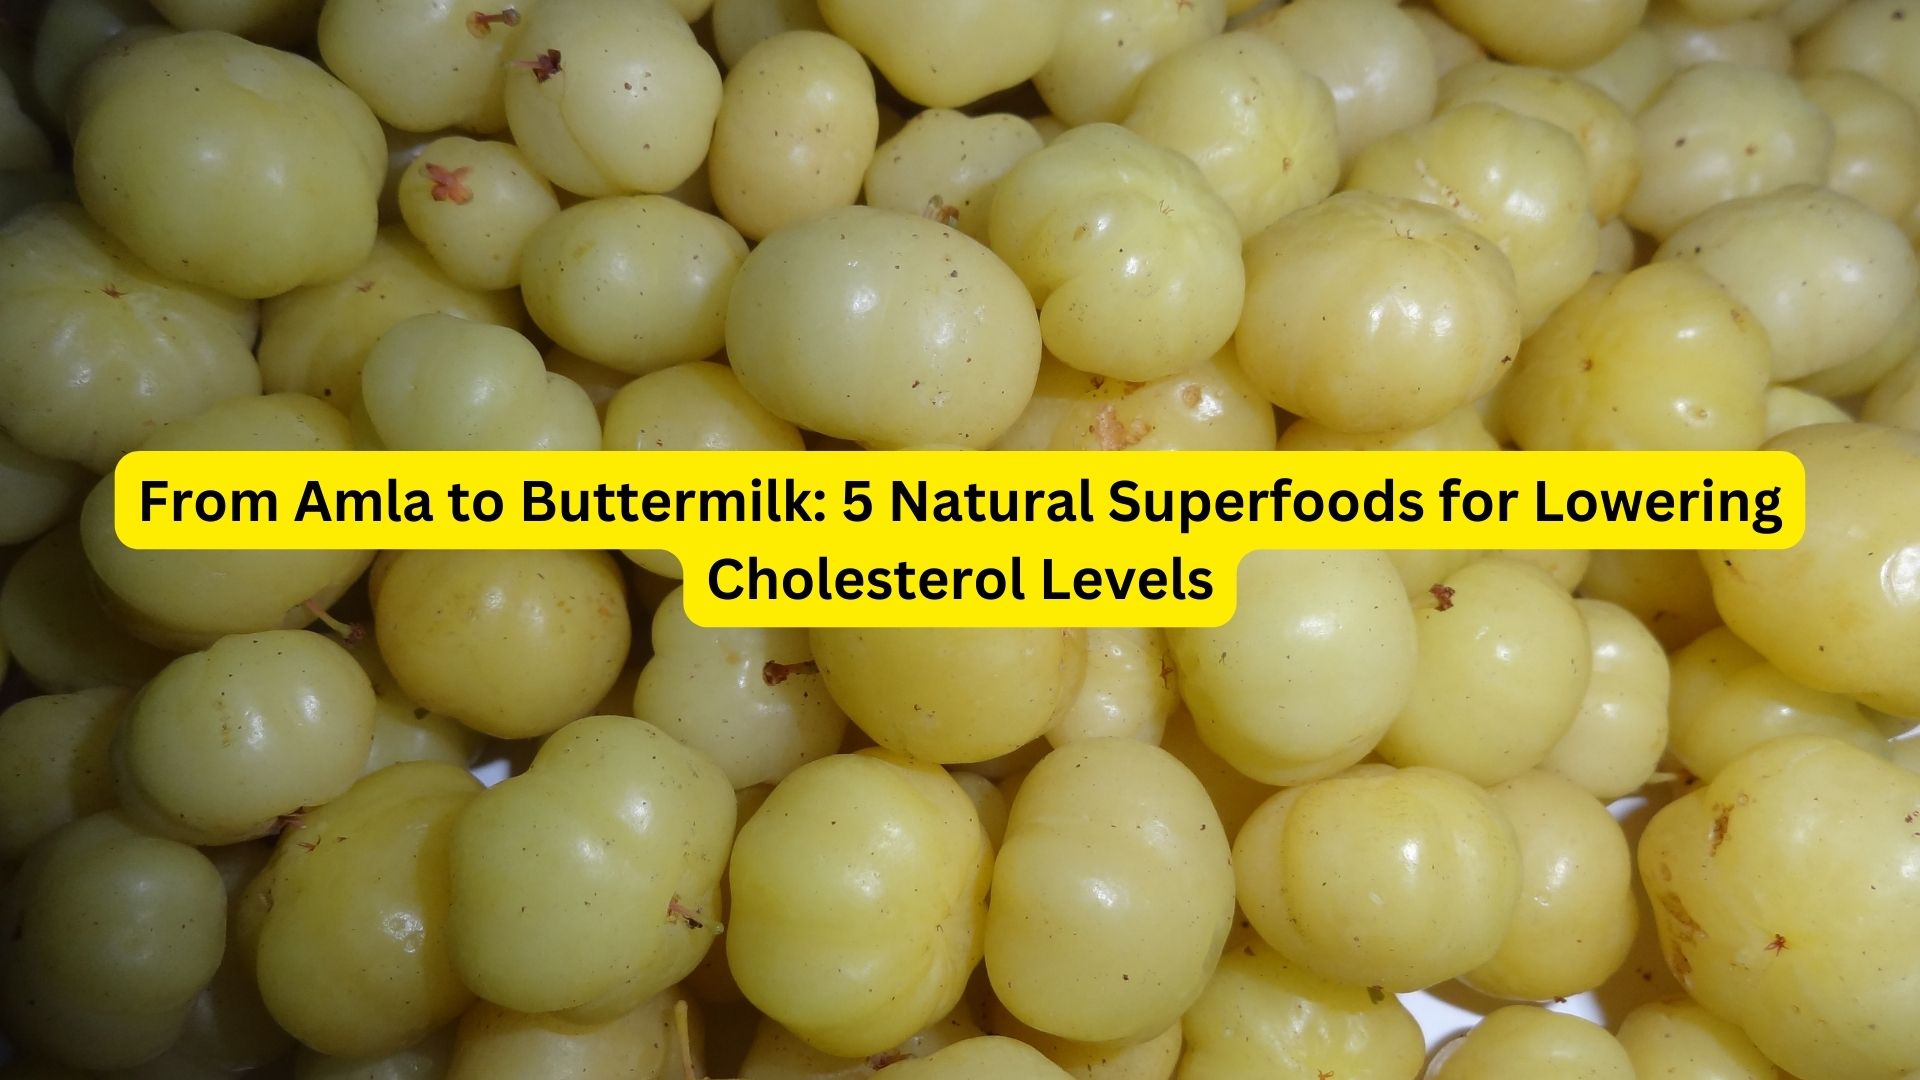 From Amla to Buttermilk: 5 Natural Superfoods for Lowering Cholesterol Levels